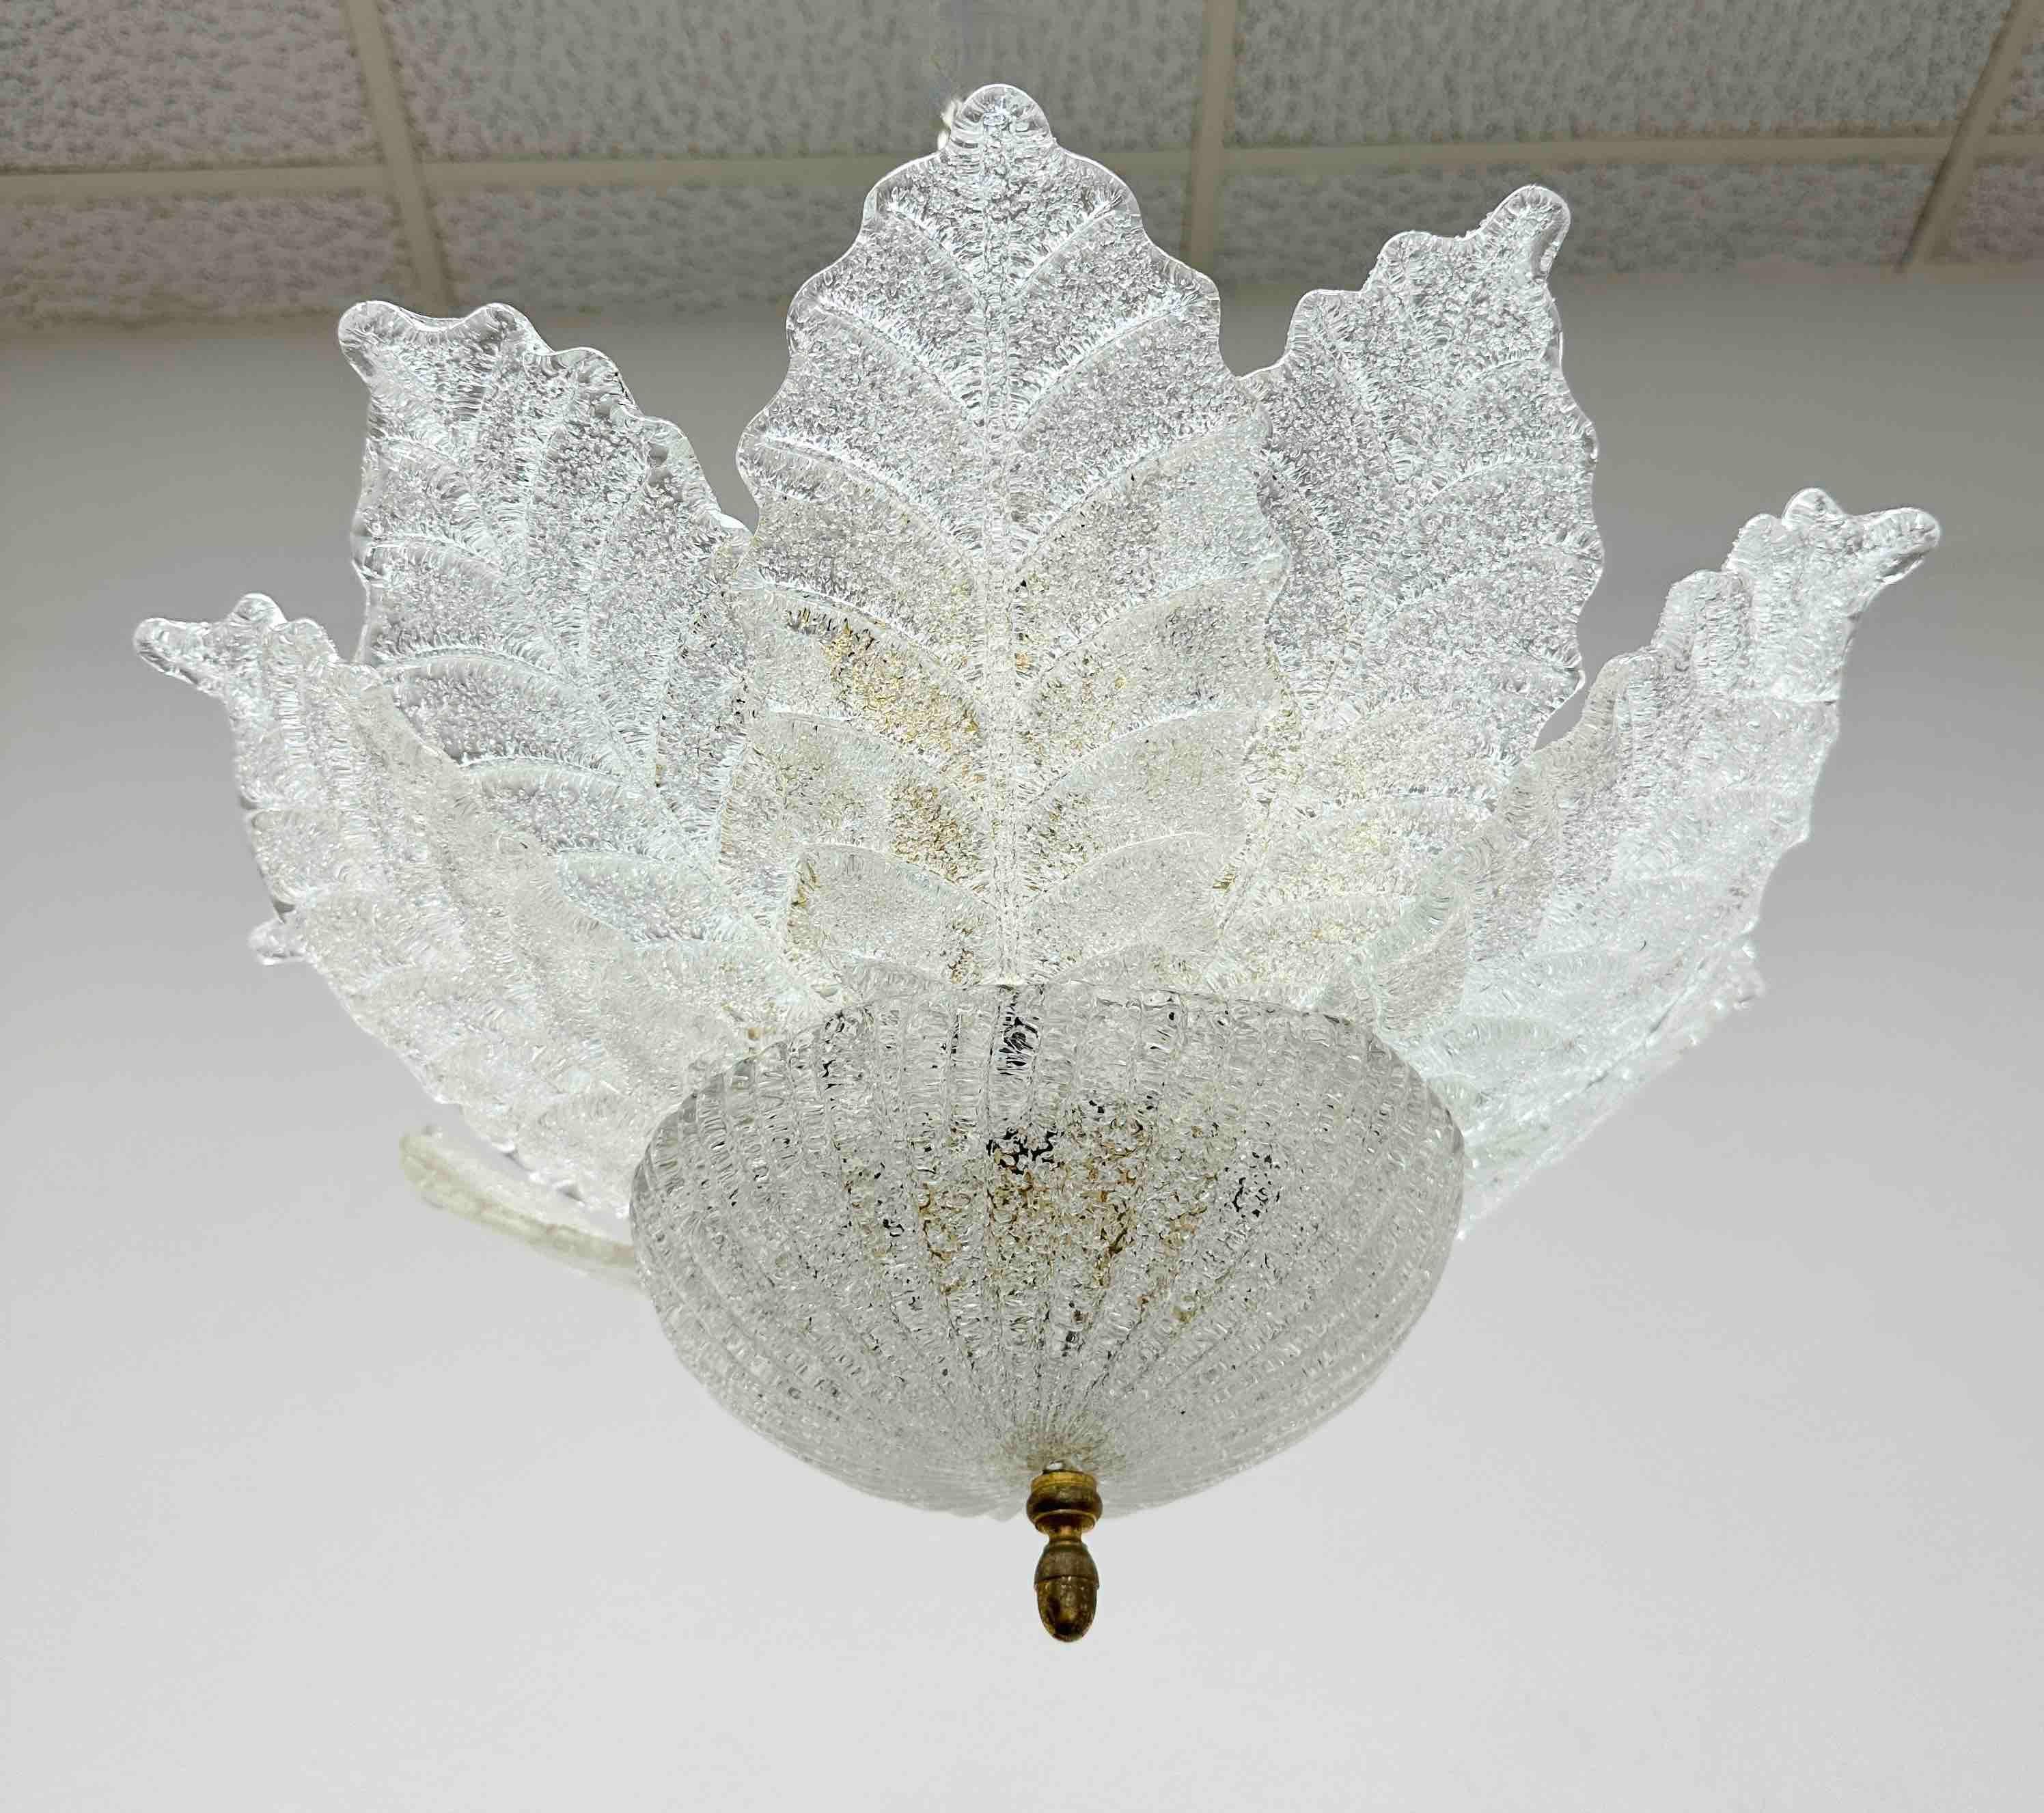 Very elegant, vintage estate, midcentury Venetian Murano art glass flush mount with clear Murano glass leaves hand blown in Graniglia technique to produce a granular textured effect, mounted on gold finish internal frame with a total of 6 lights.